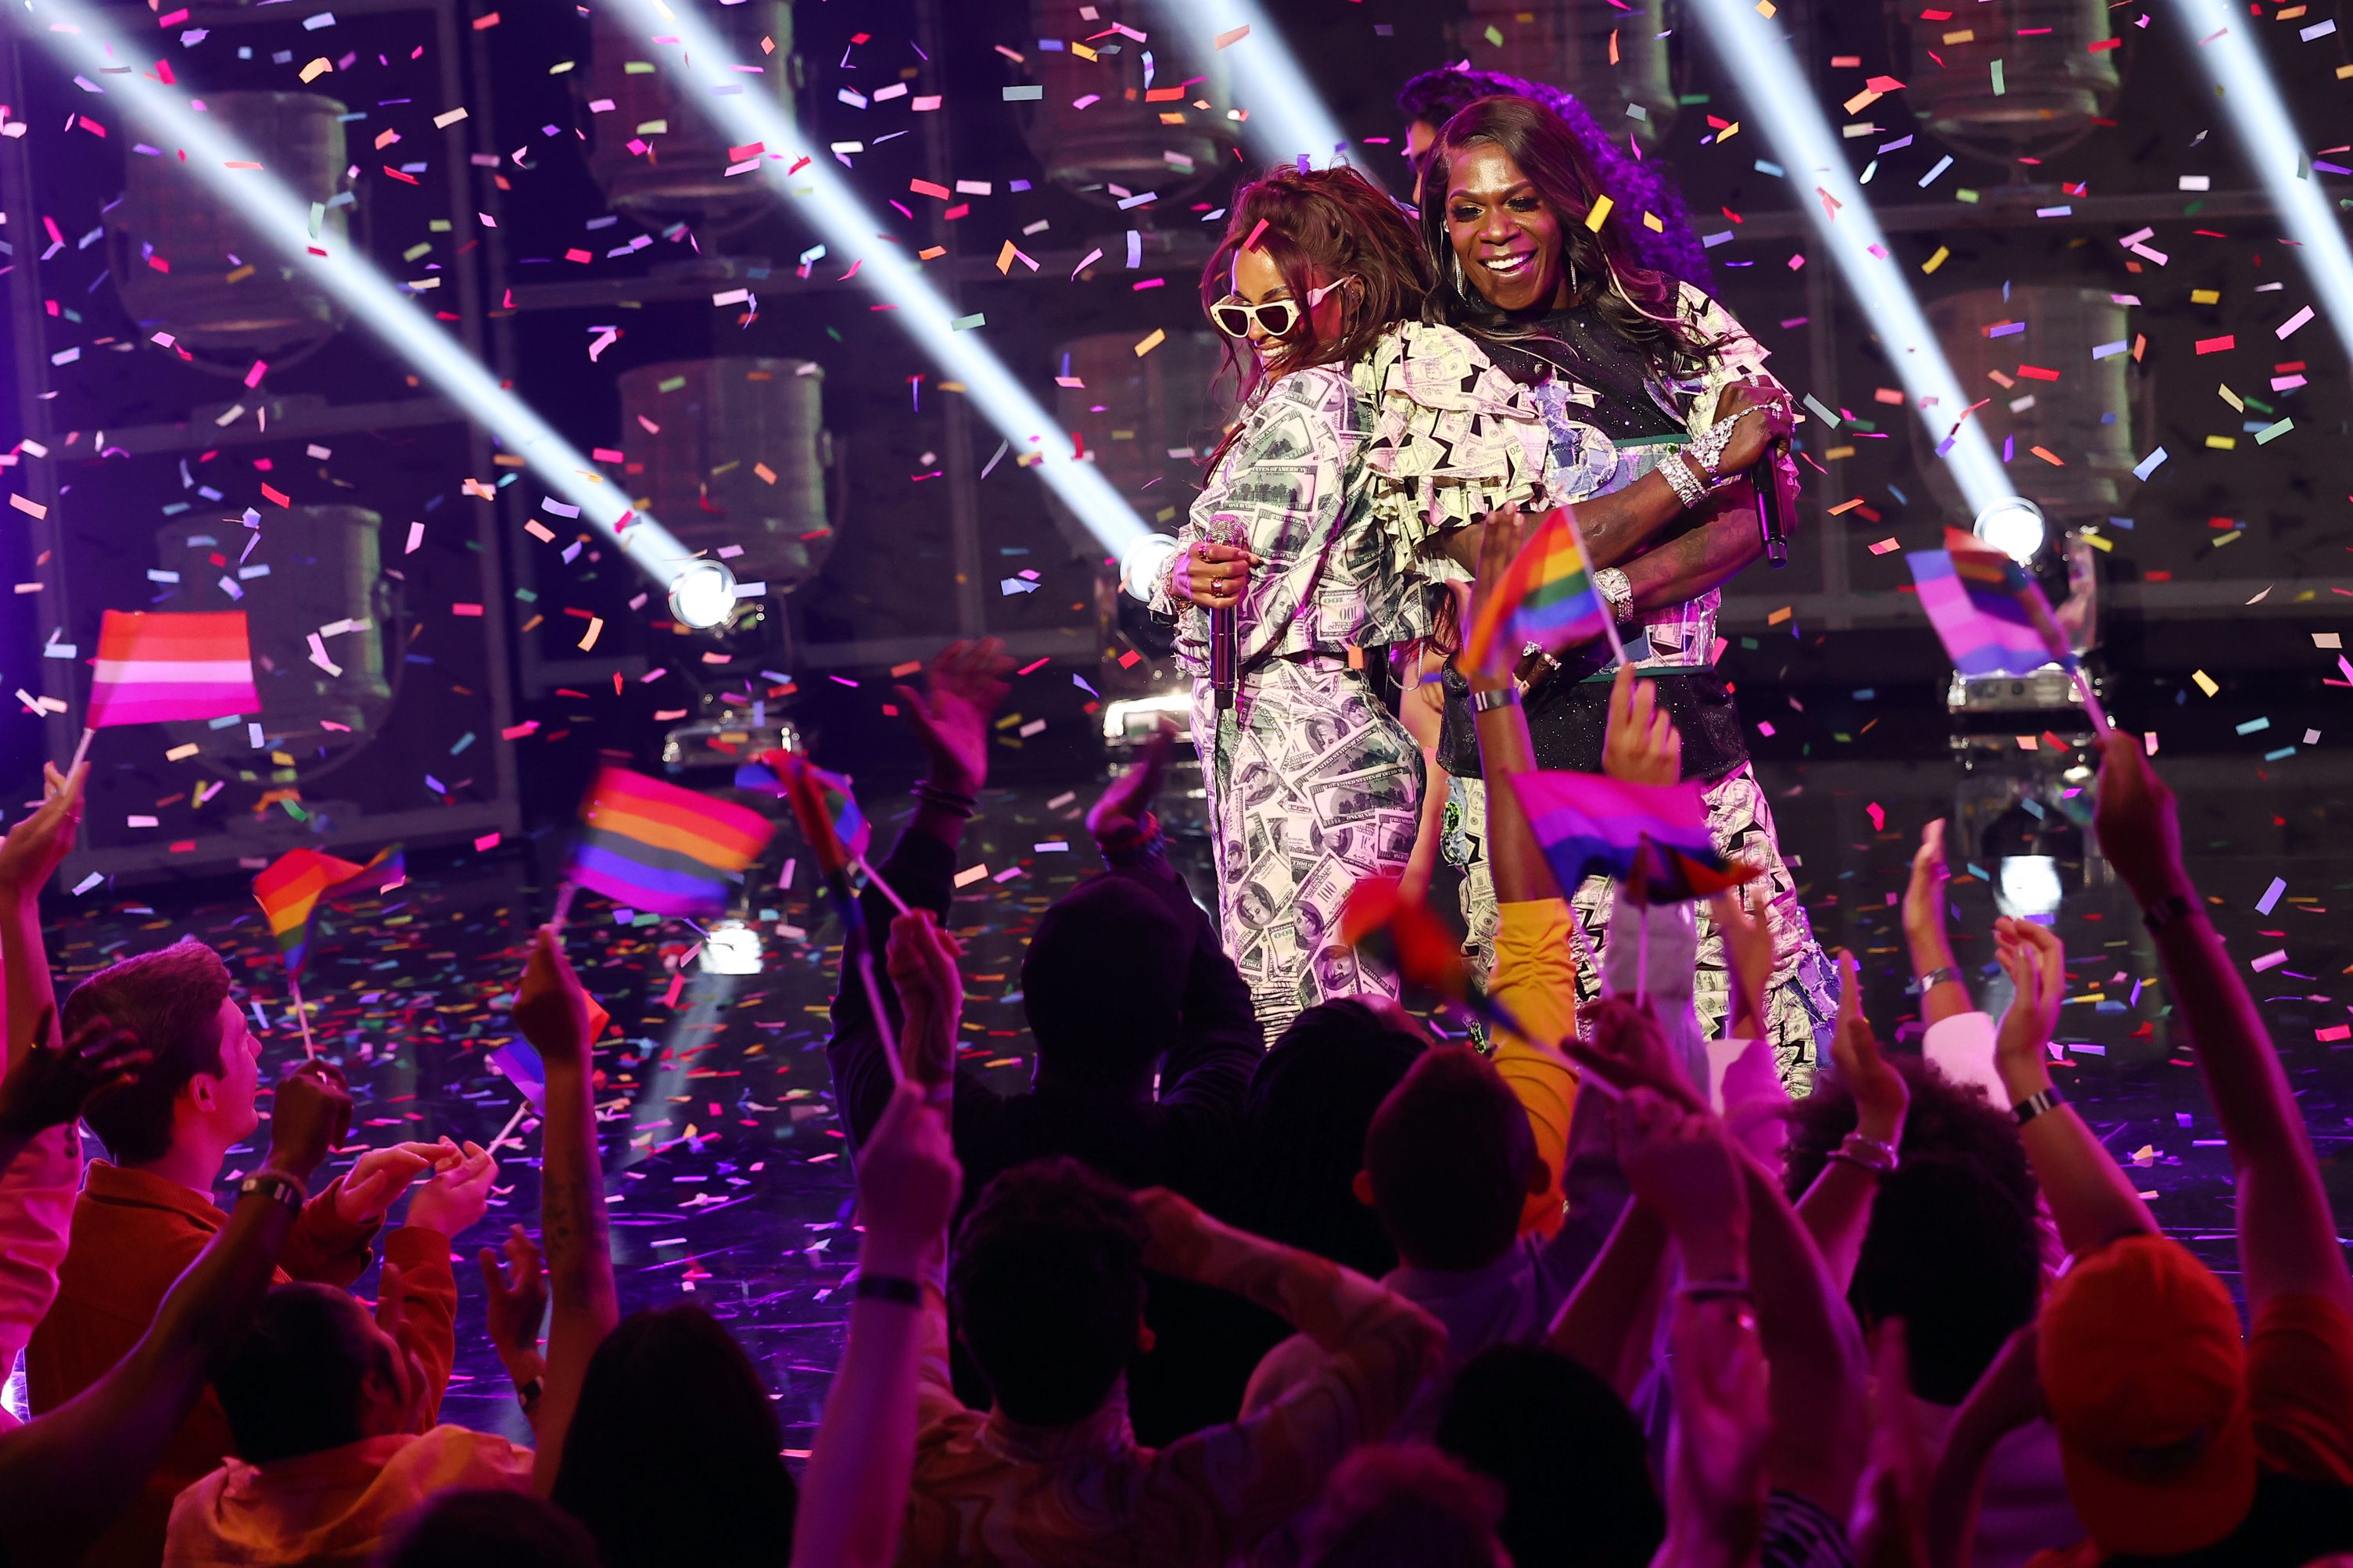 Ciara and Big Freedia pose, back to back, during an on-stage performance. Rainbow-colored confetti and spotlights fill the air around them.